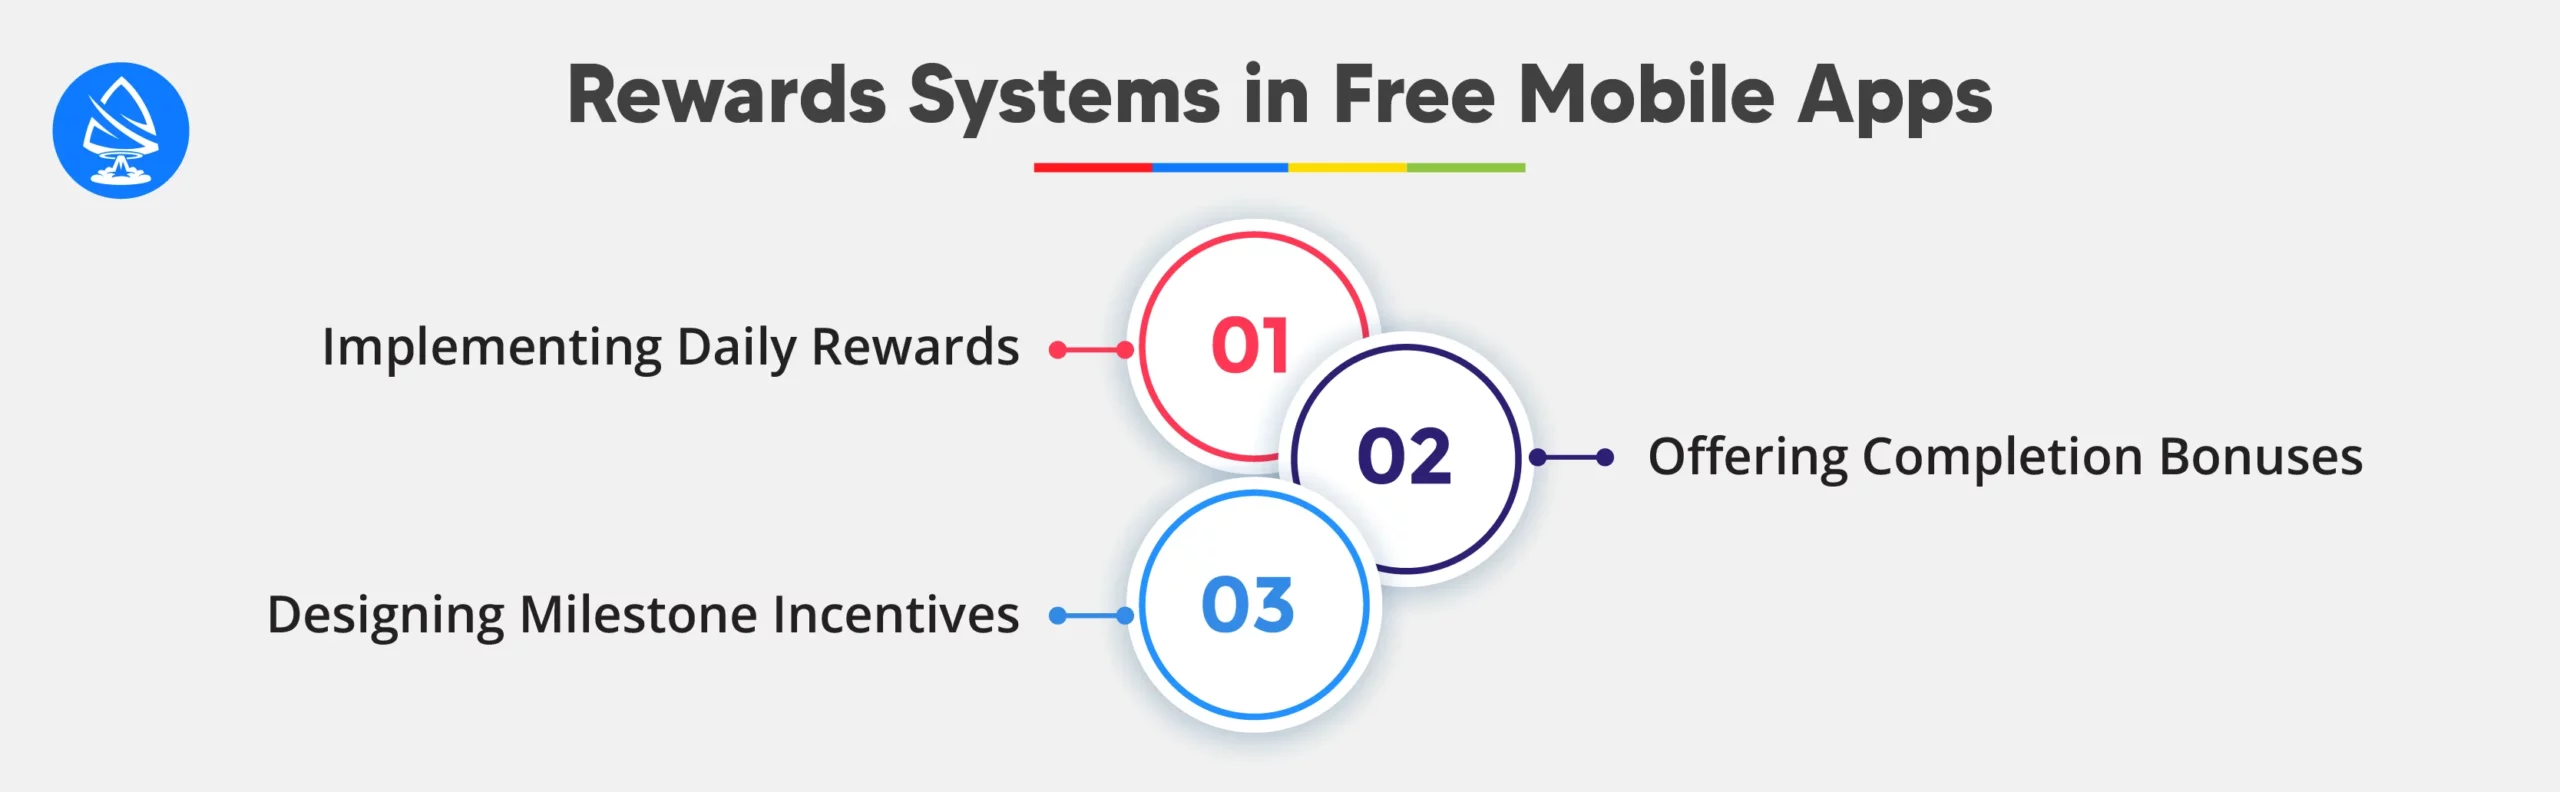 Incentives and Rewards Systems in Free Mobile Apps